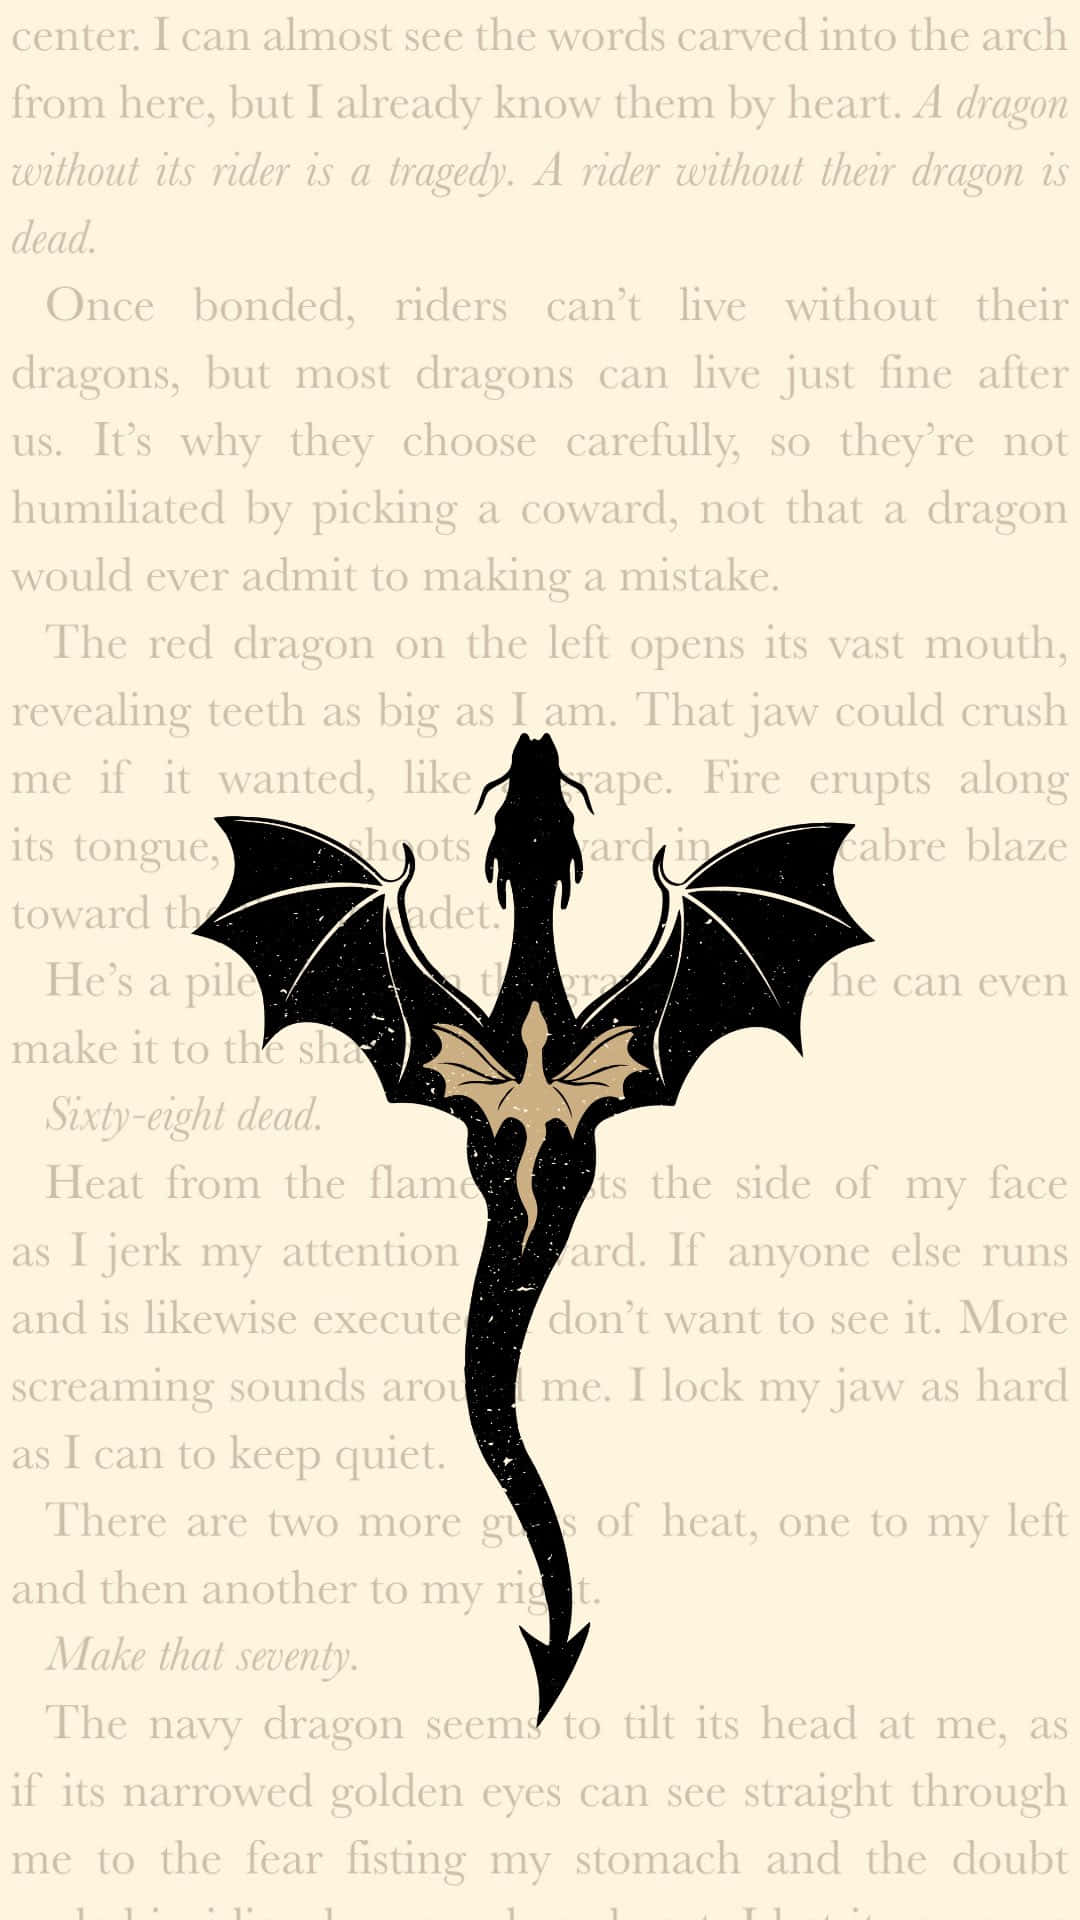 Dragon Silhouette Against Text Background Wallpaper